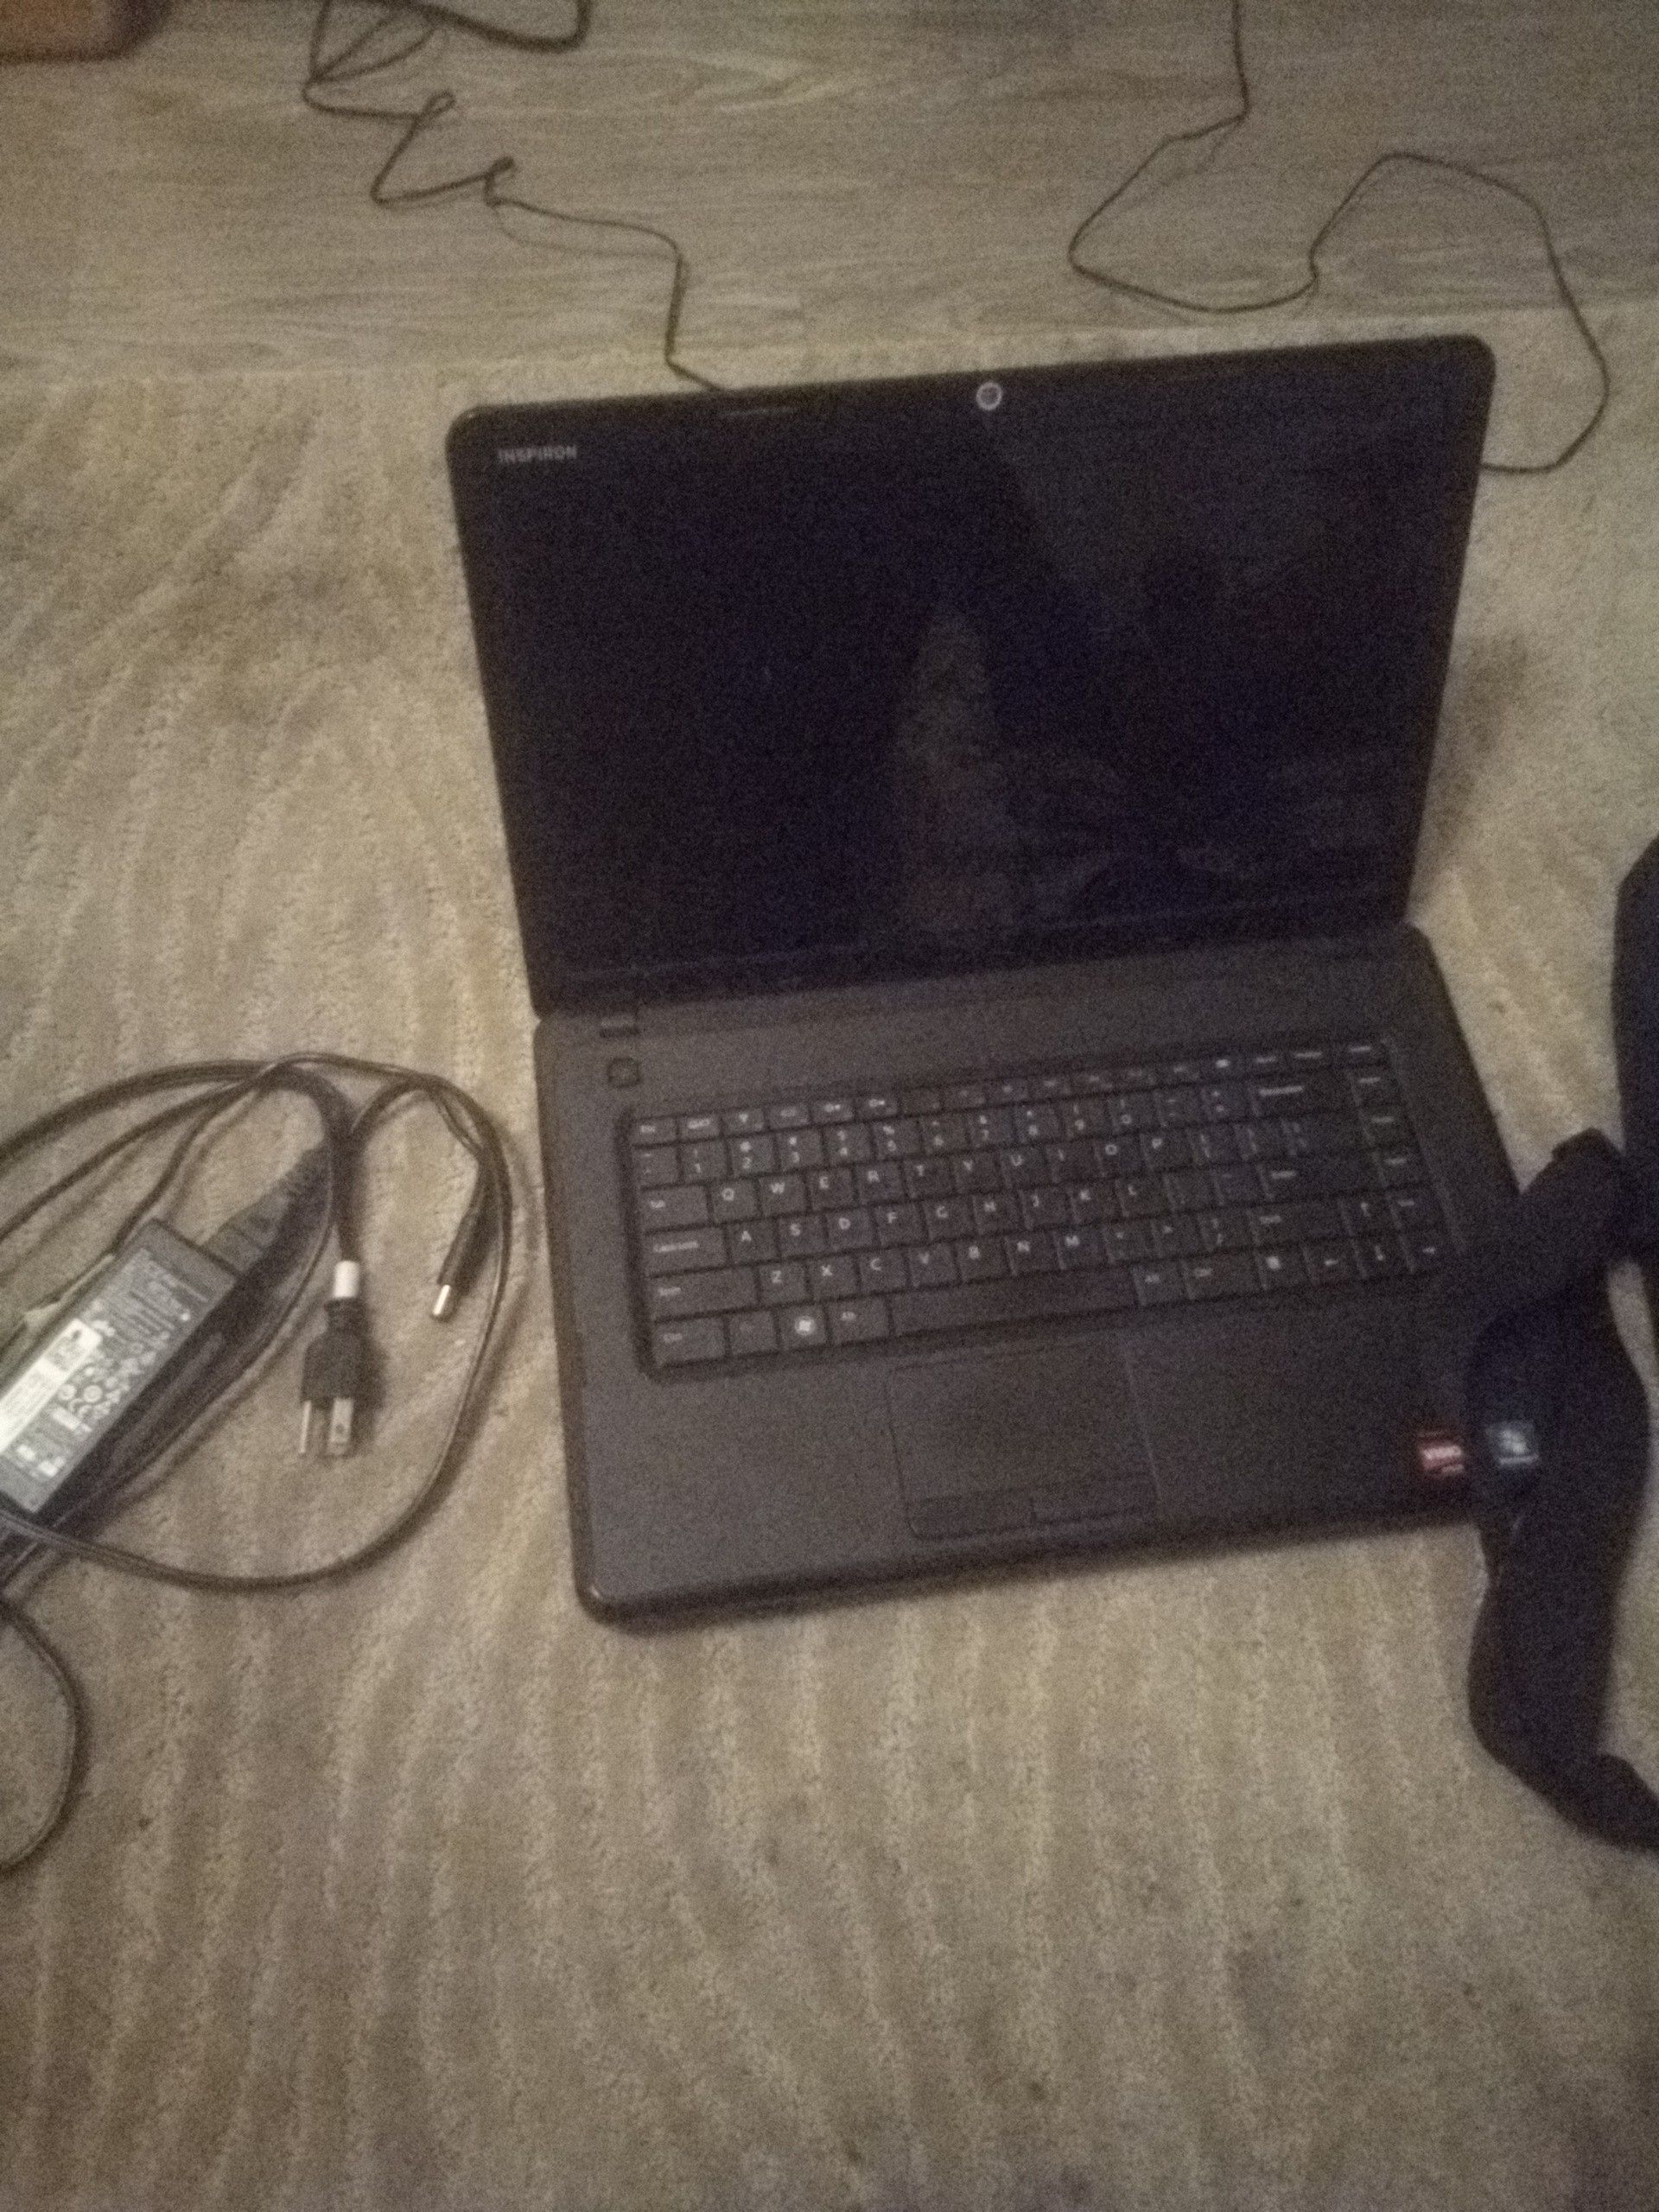 Black Dell Laptop (mint condition) w/ charger